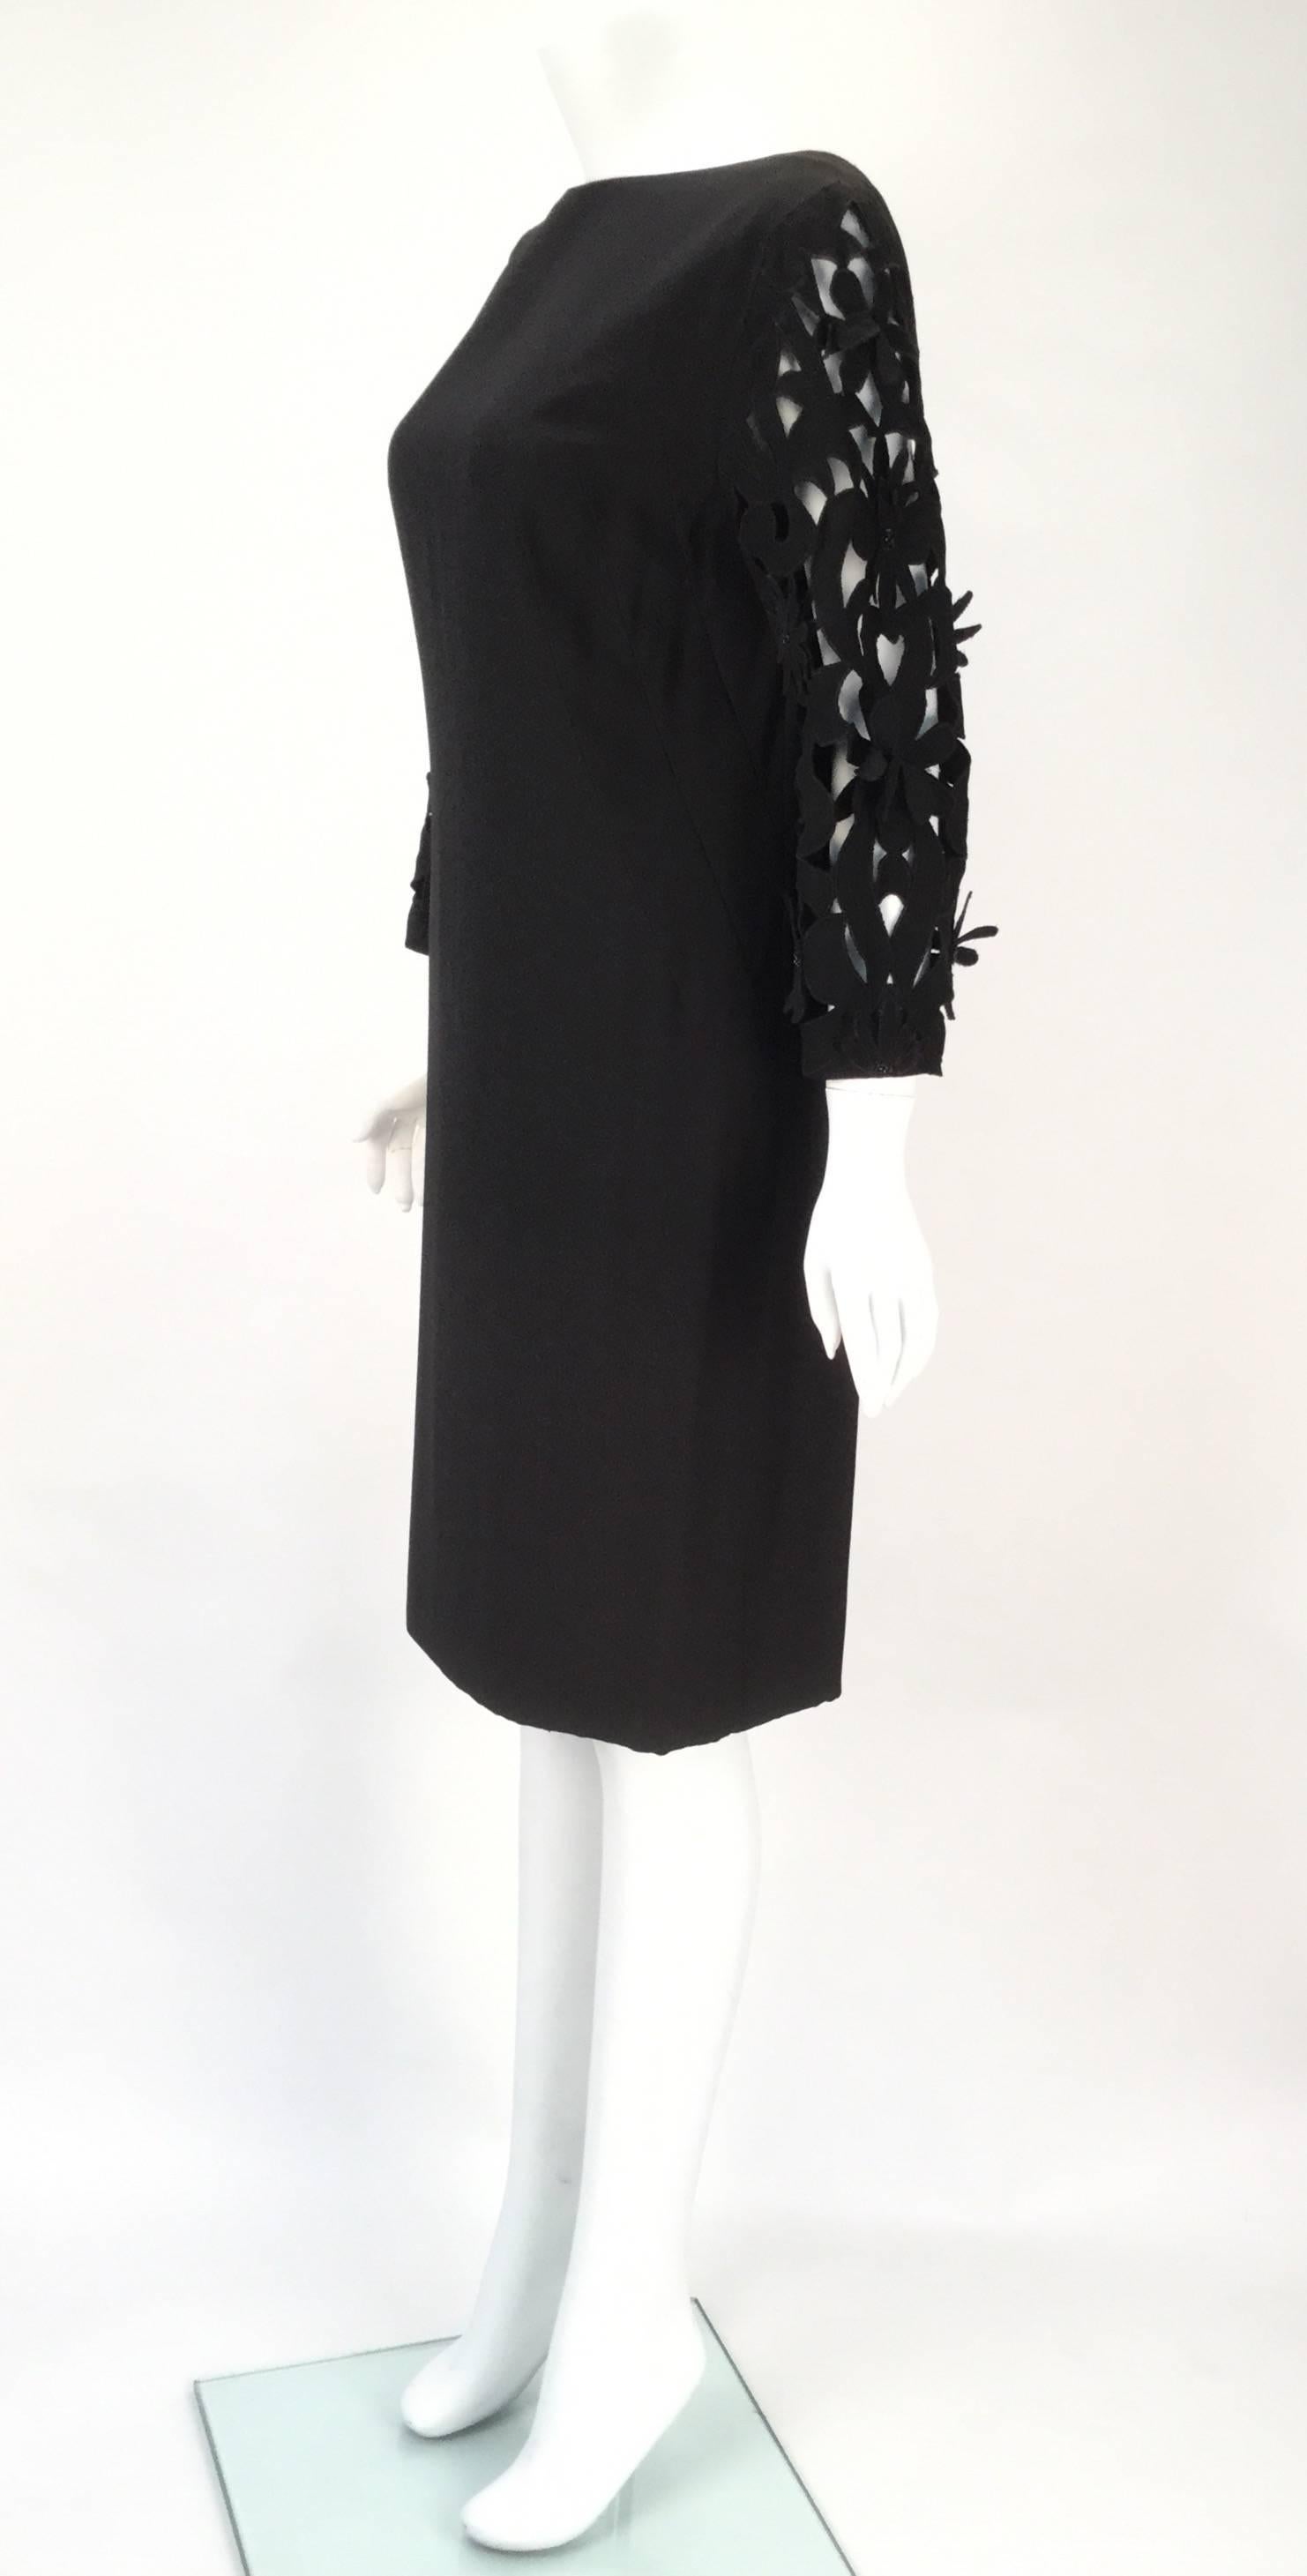 1970s Renato Balestra  Black  Dress with Floral Cutout Sleeves In Good Condition For Sale In Houston, TX